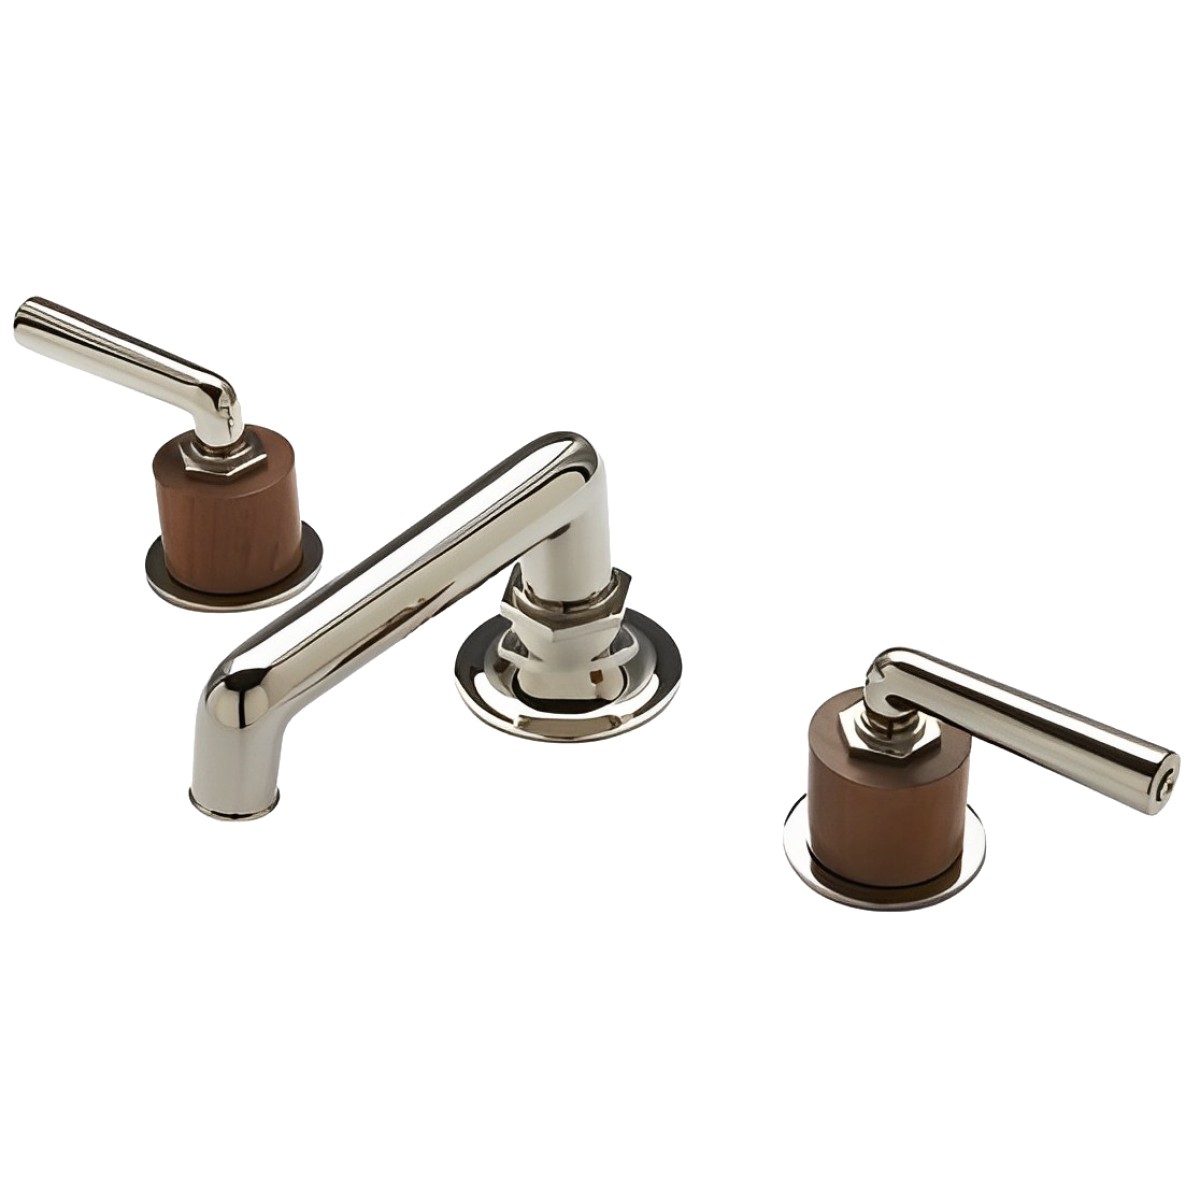 Henry Low Profile Three Hole Deck Mounted Lavatory Faucet with Teak Cylinders and Metal Lever Handles